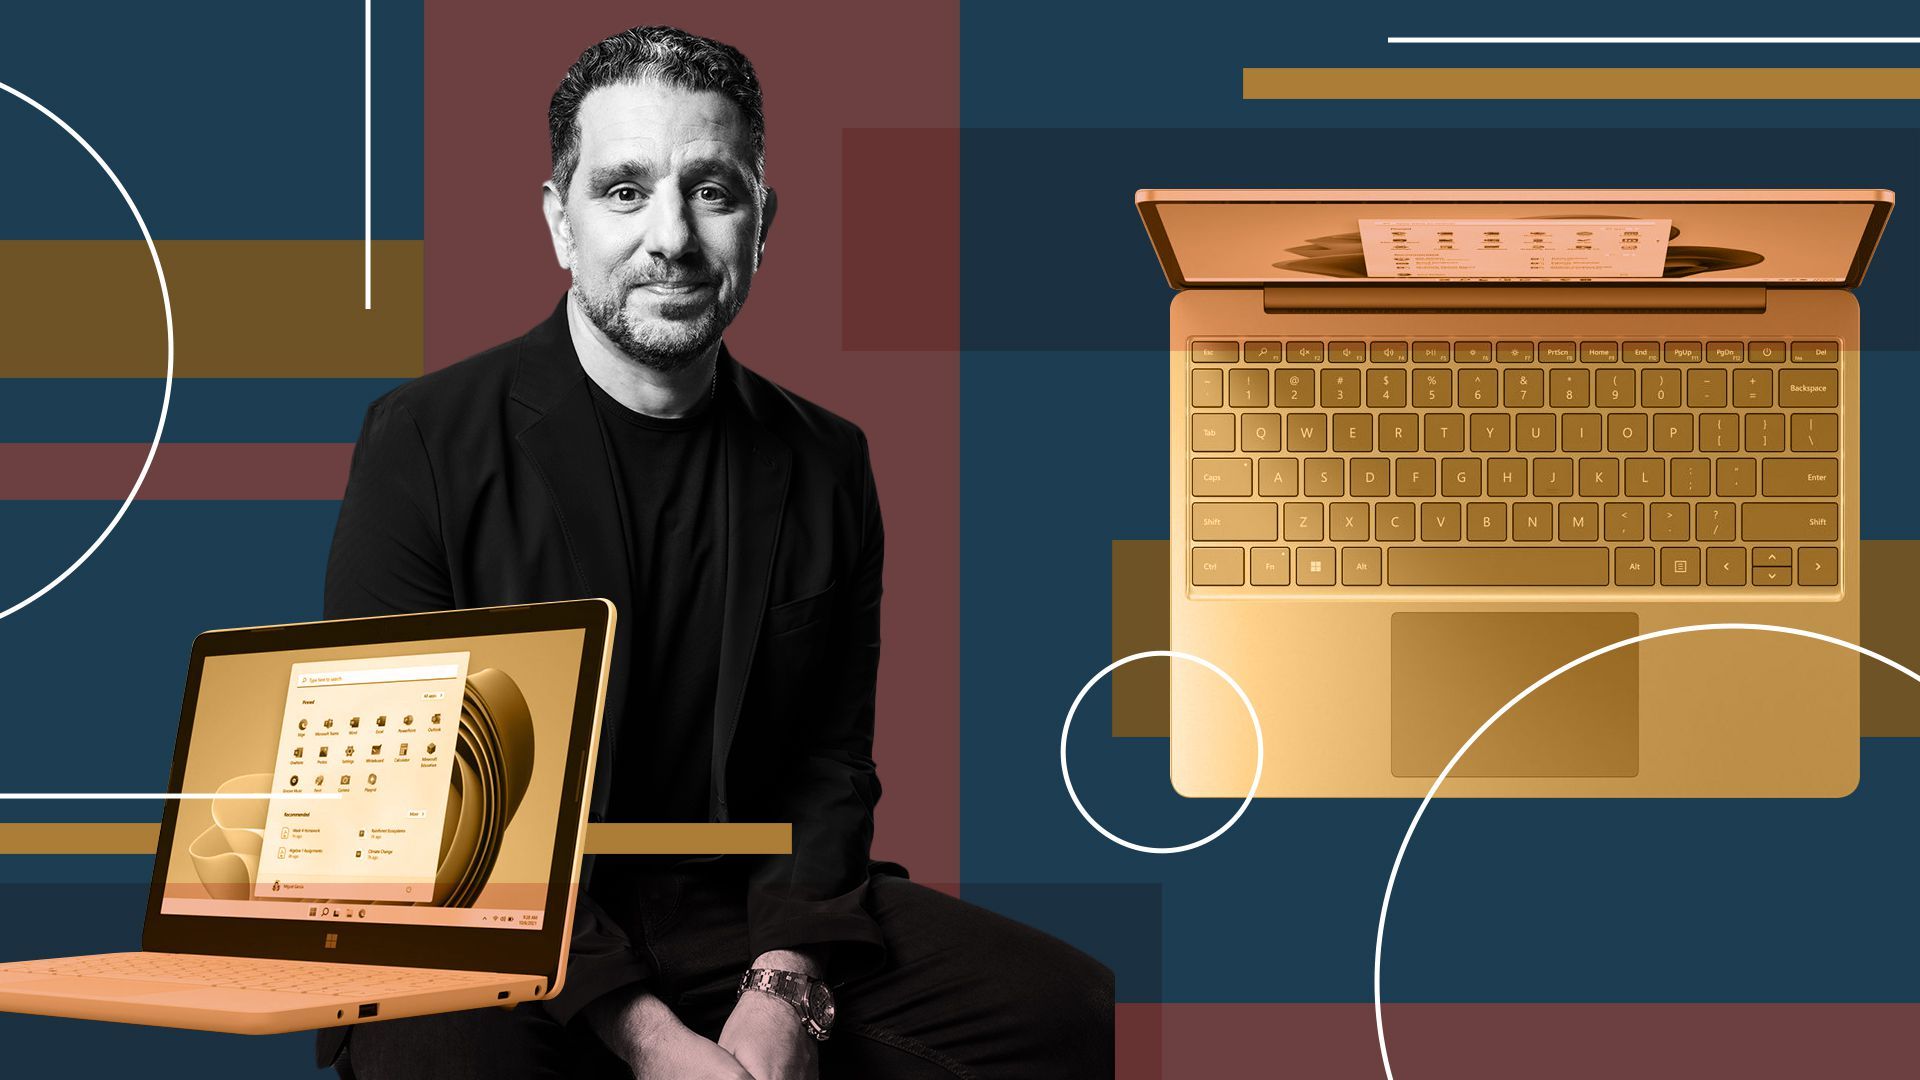 Photo illustration of Panos Panay, Microsoft’s head of Windows, with abstract shapes and Surface PCs.